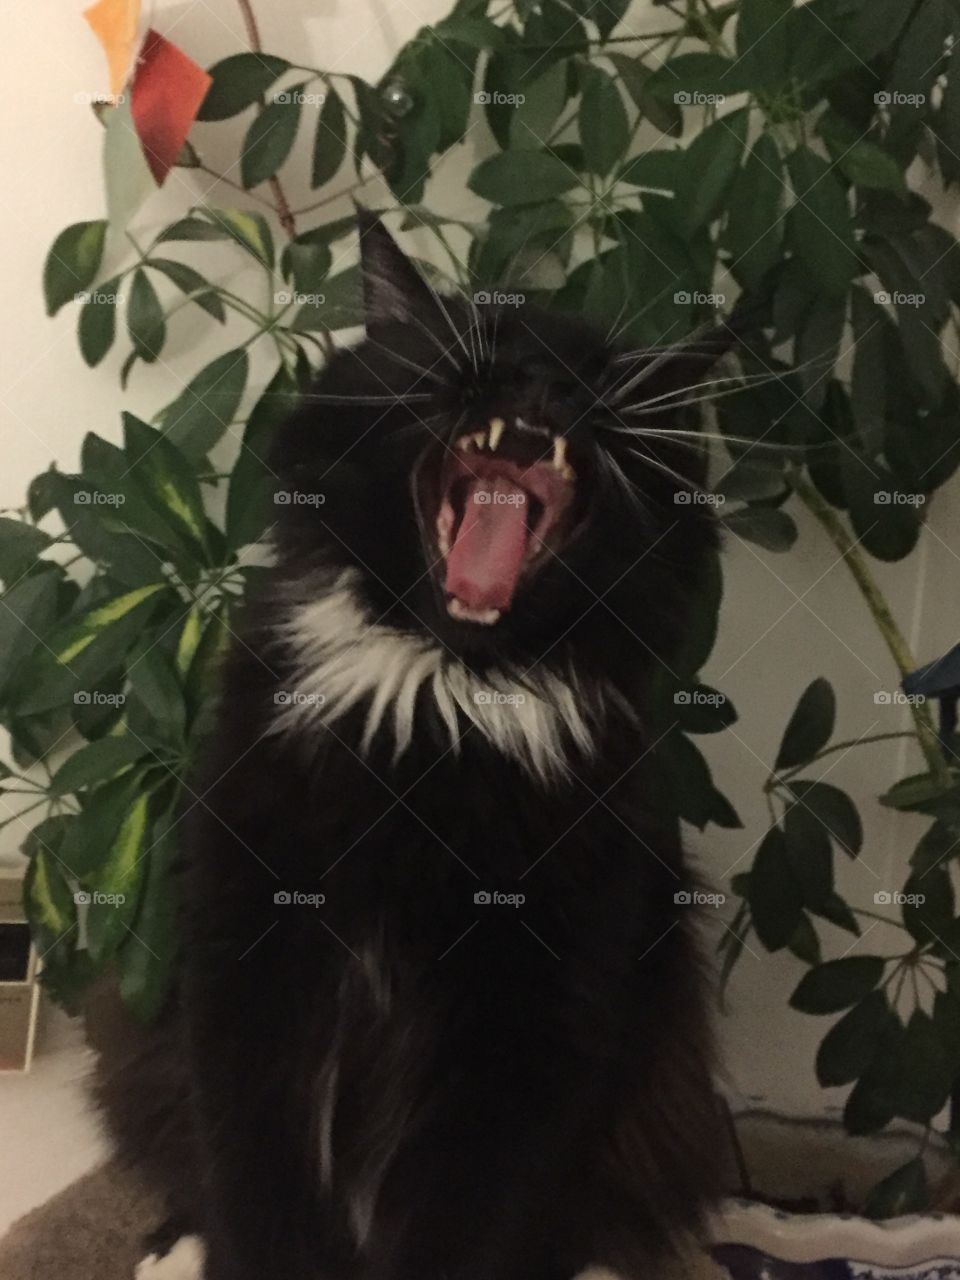 Is this cat singing or laughing? He is just bored and yawning. Or maybe he is tired, and it’s his bedtime? 